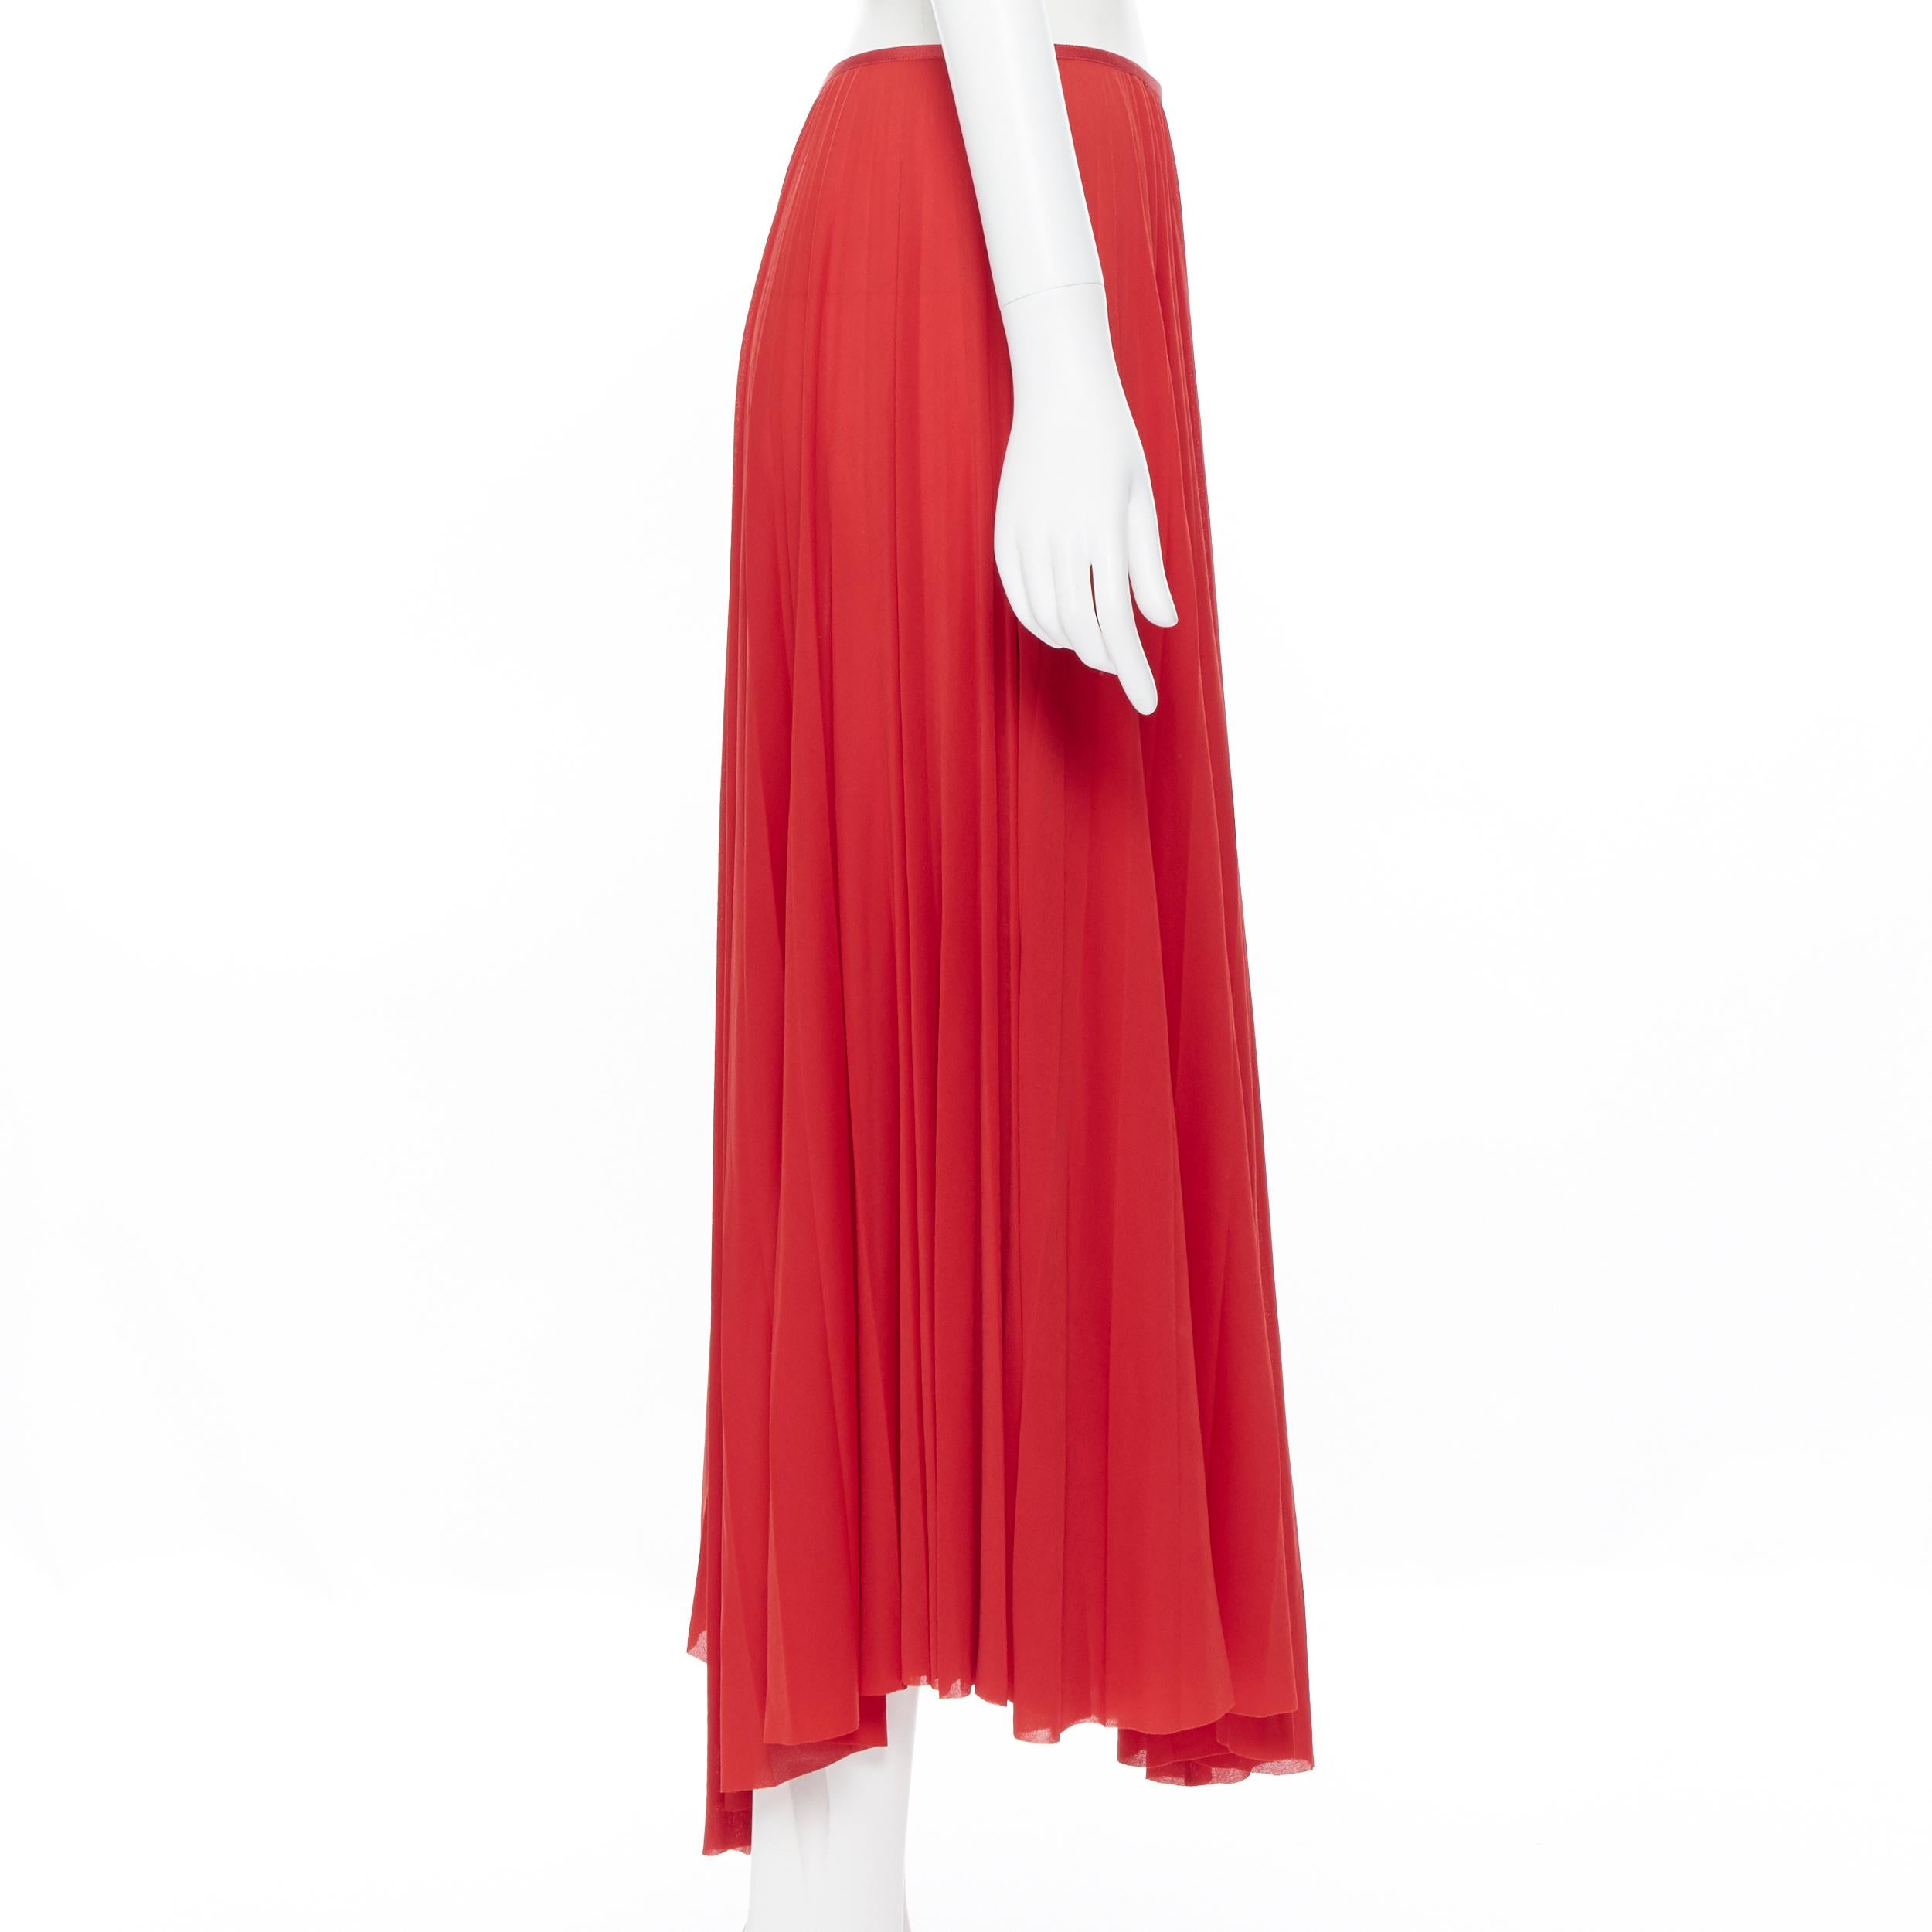 Red OLD CELINE PHOEBE PHILO 100% polyester poppy red pleated raw cut hem skirt FR36